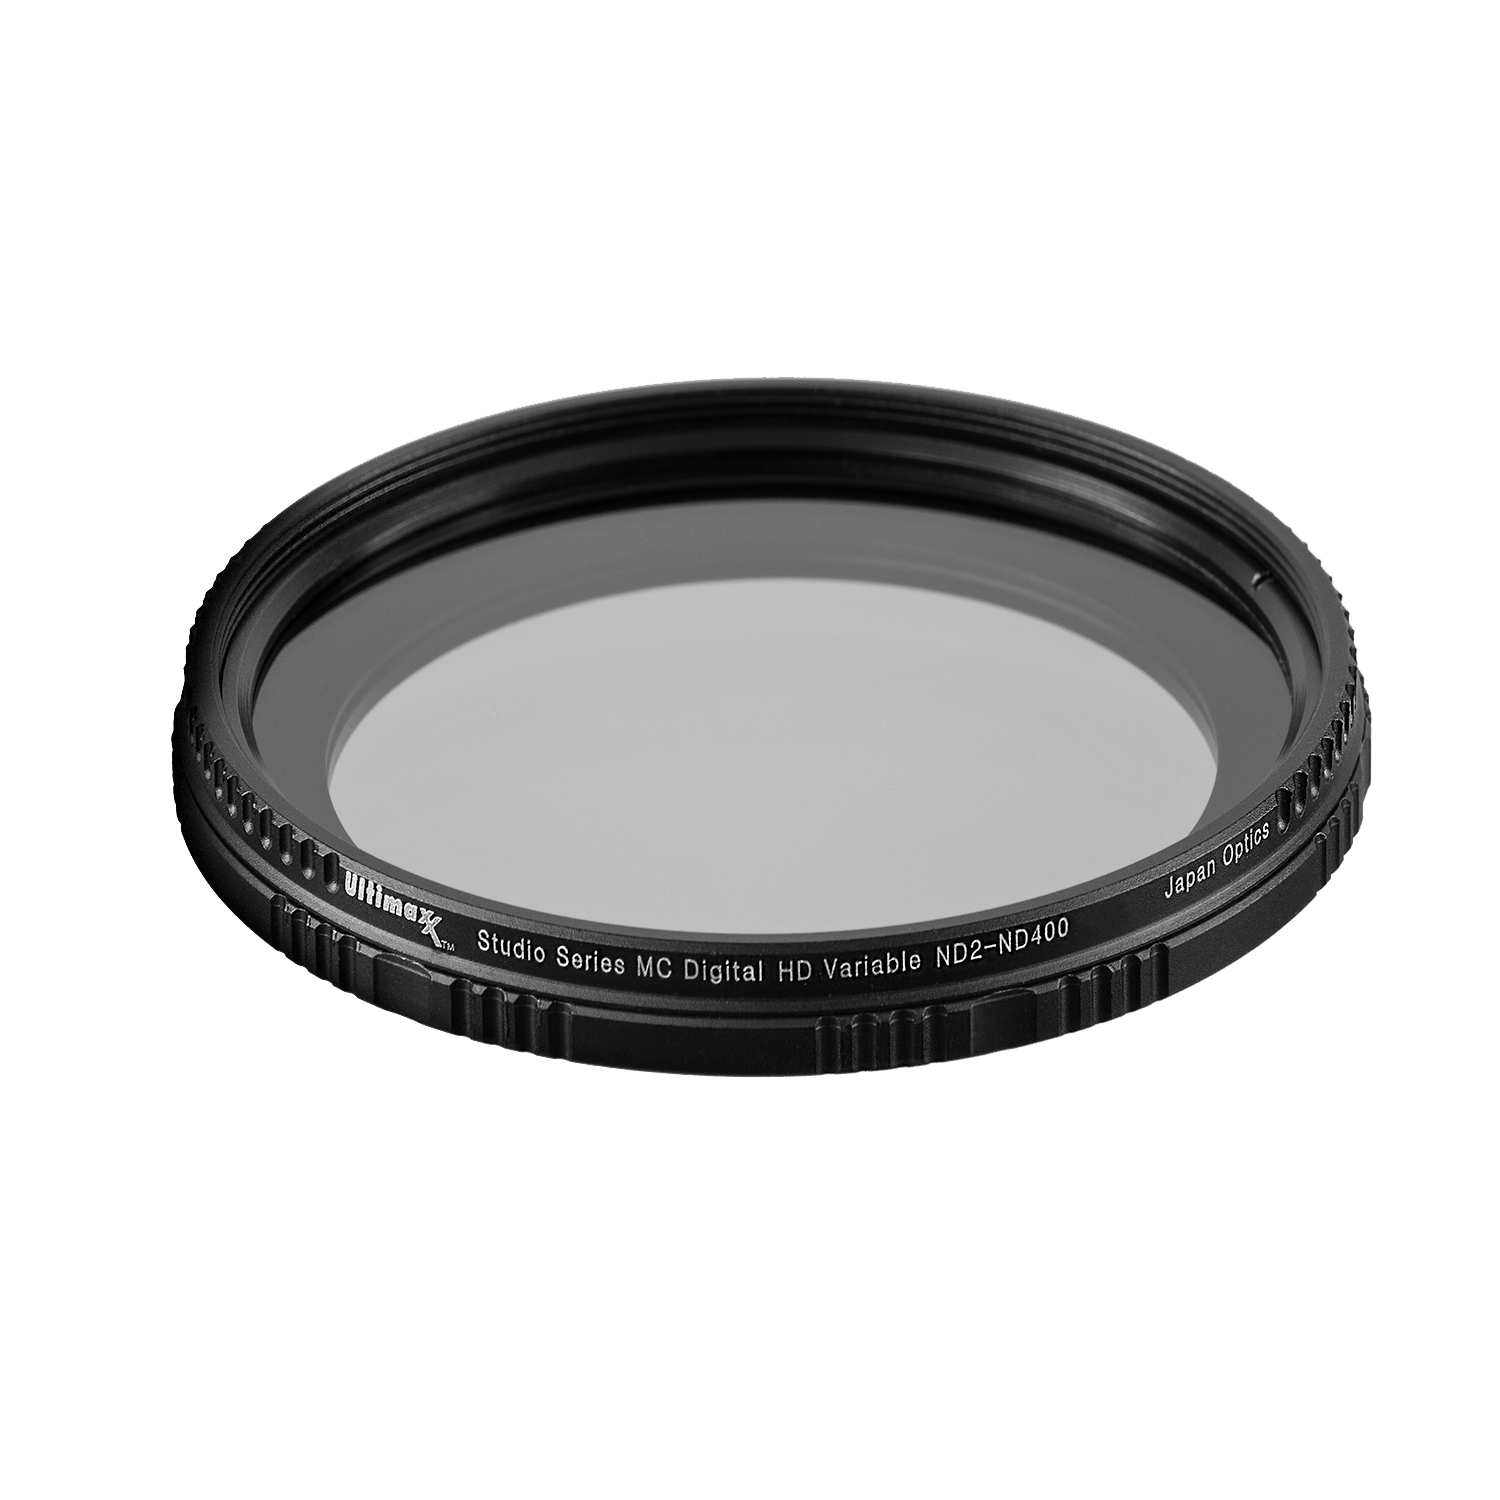 Ultimaxx 95mm VARIABLE NEUTRAL DENSITY FILTER ND2-ND400